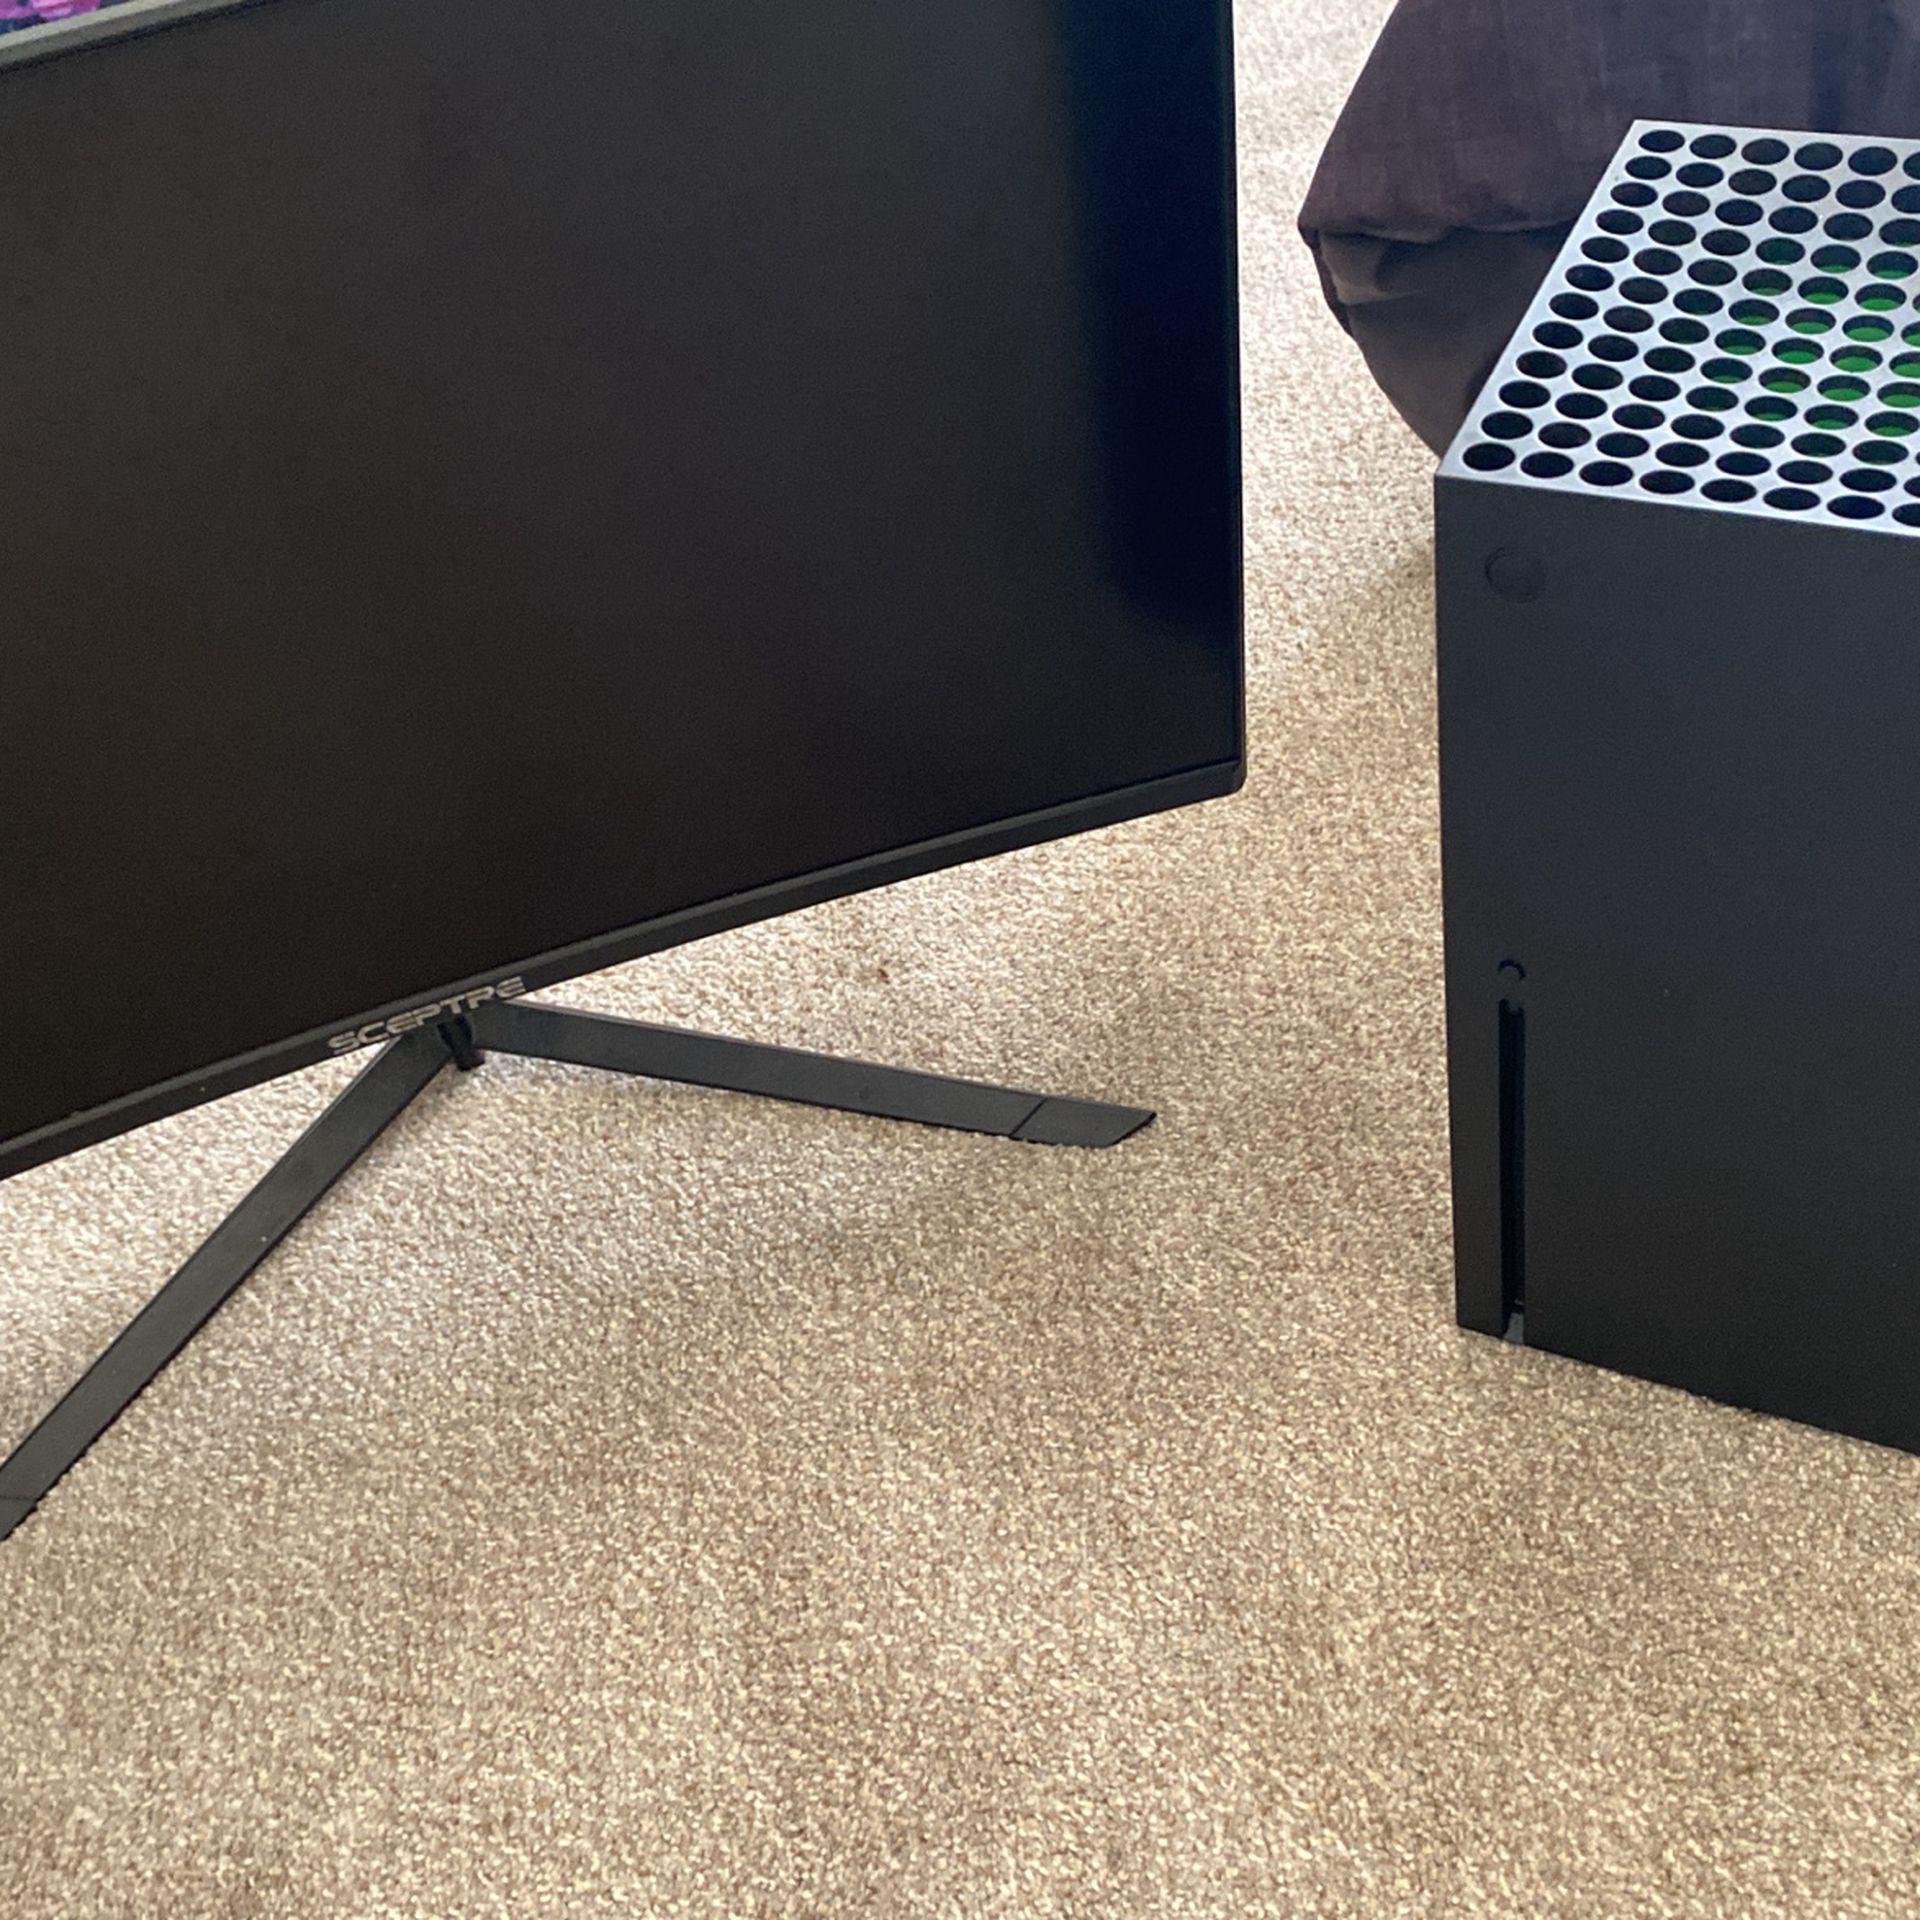 Xbox Series X And Speptre Monitor 